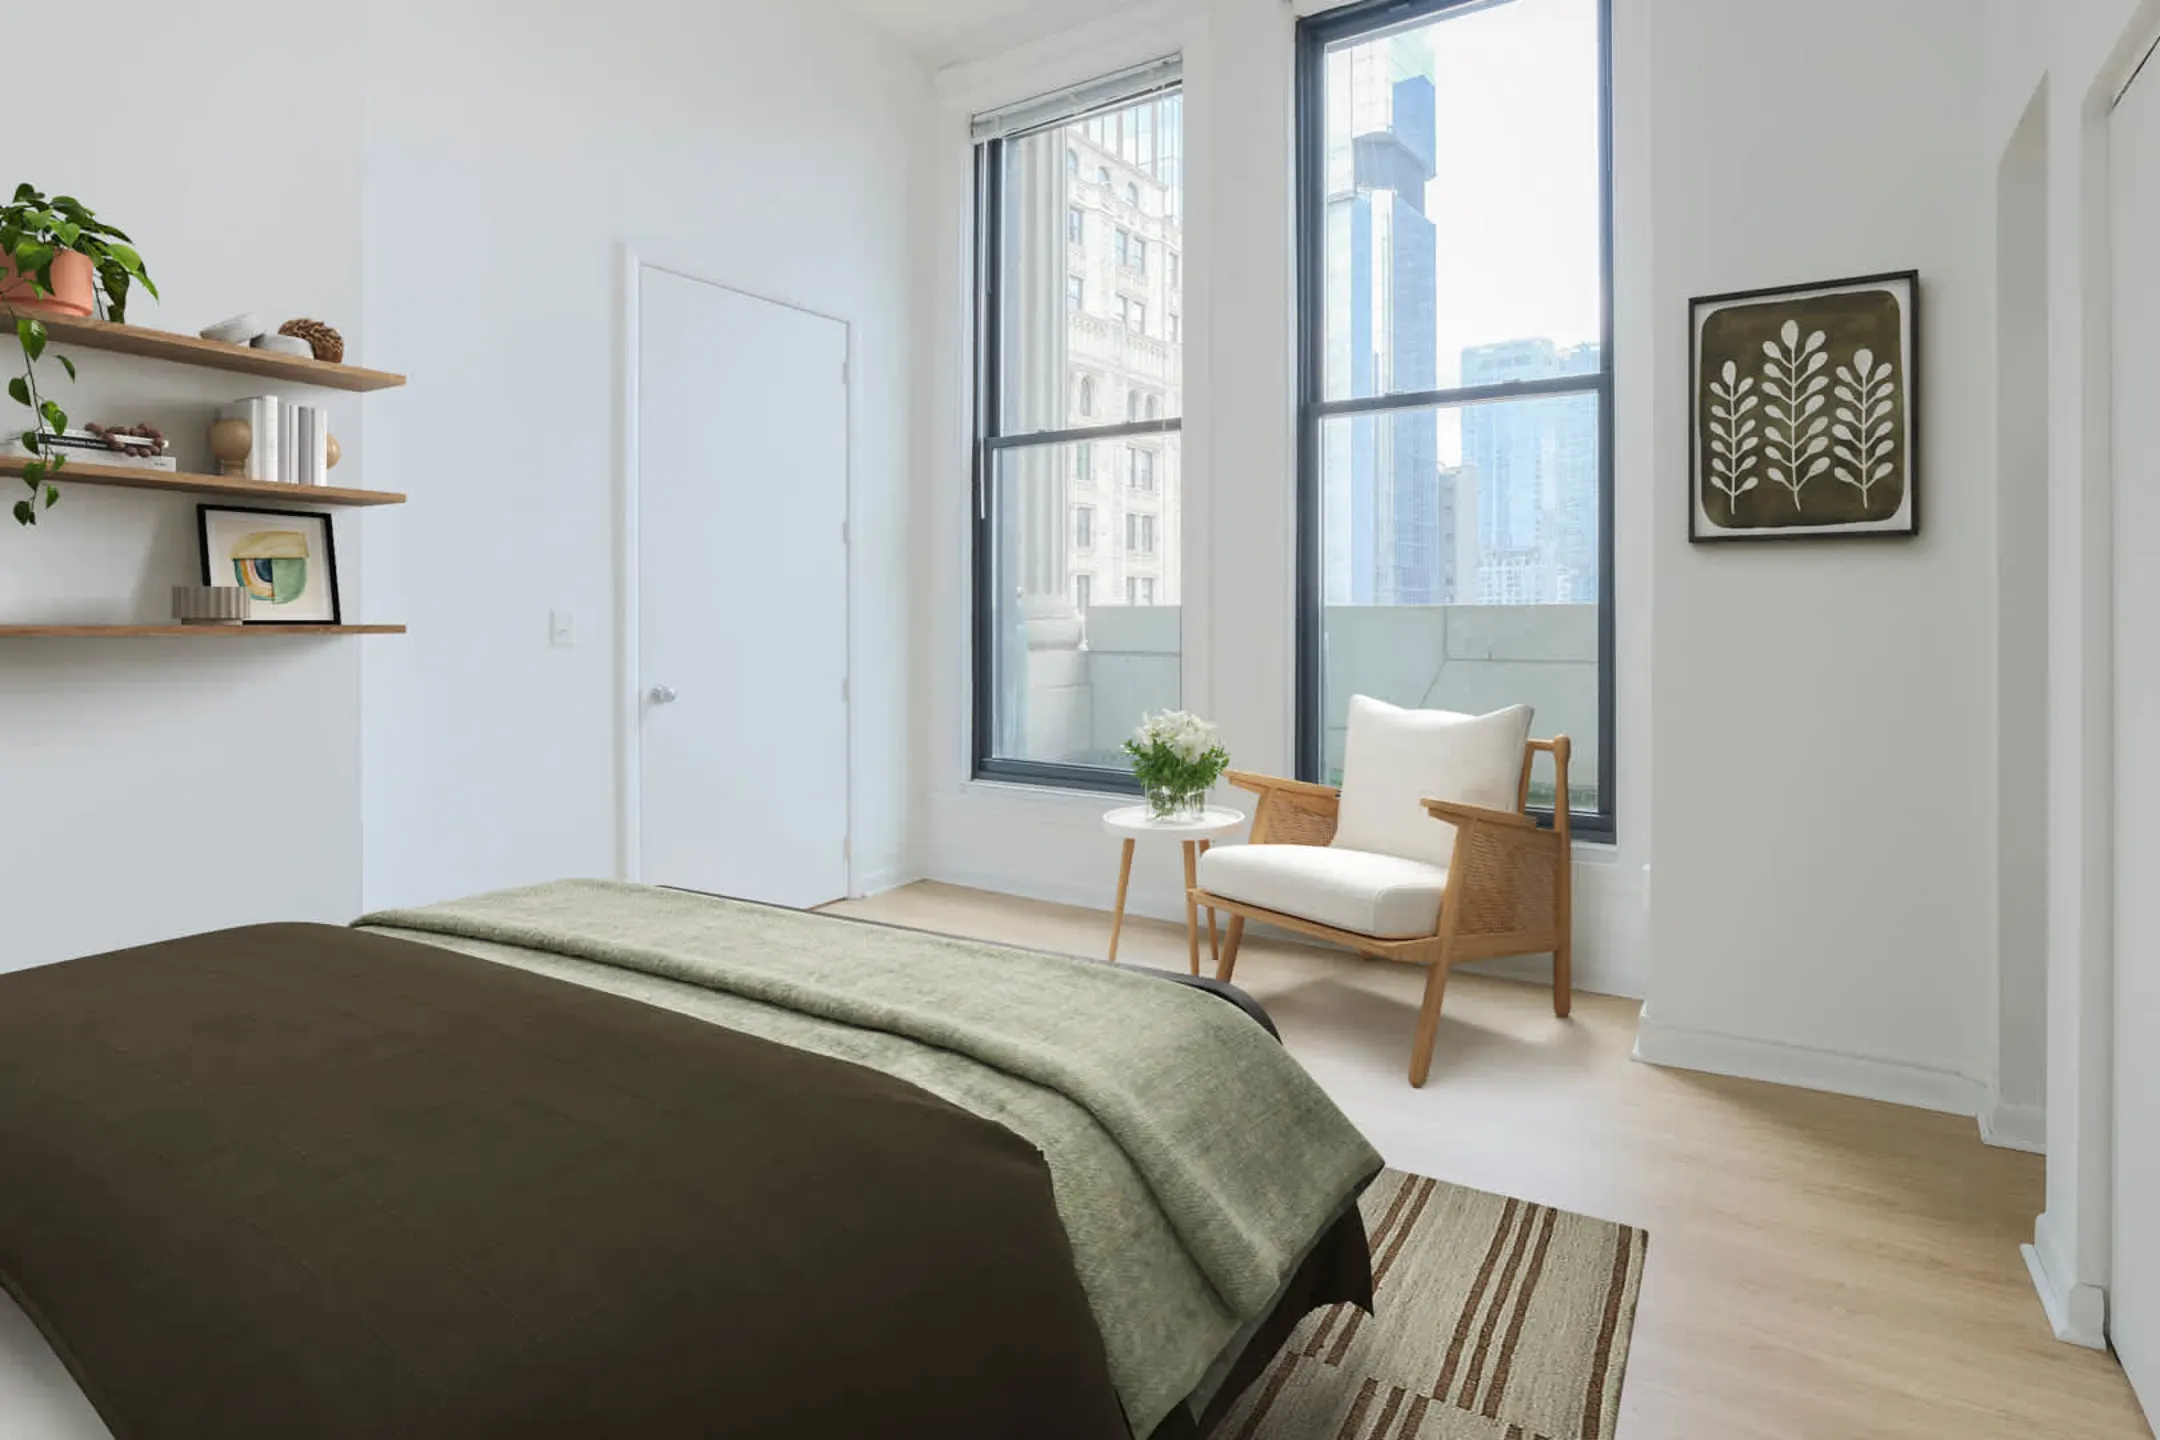 71 Broadway | New York, NY Apartments for Rent | Rent.